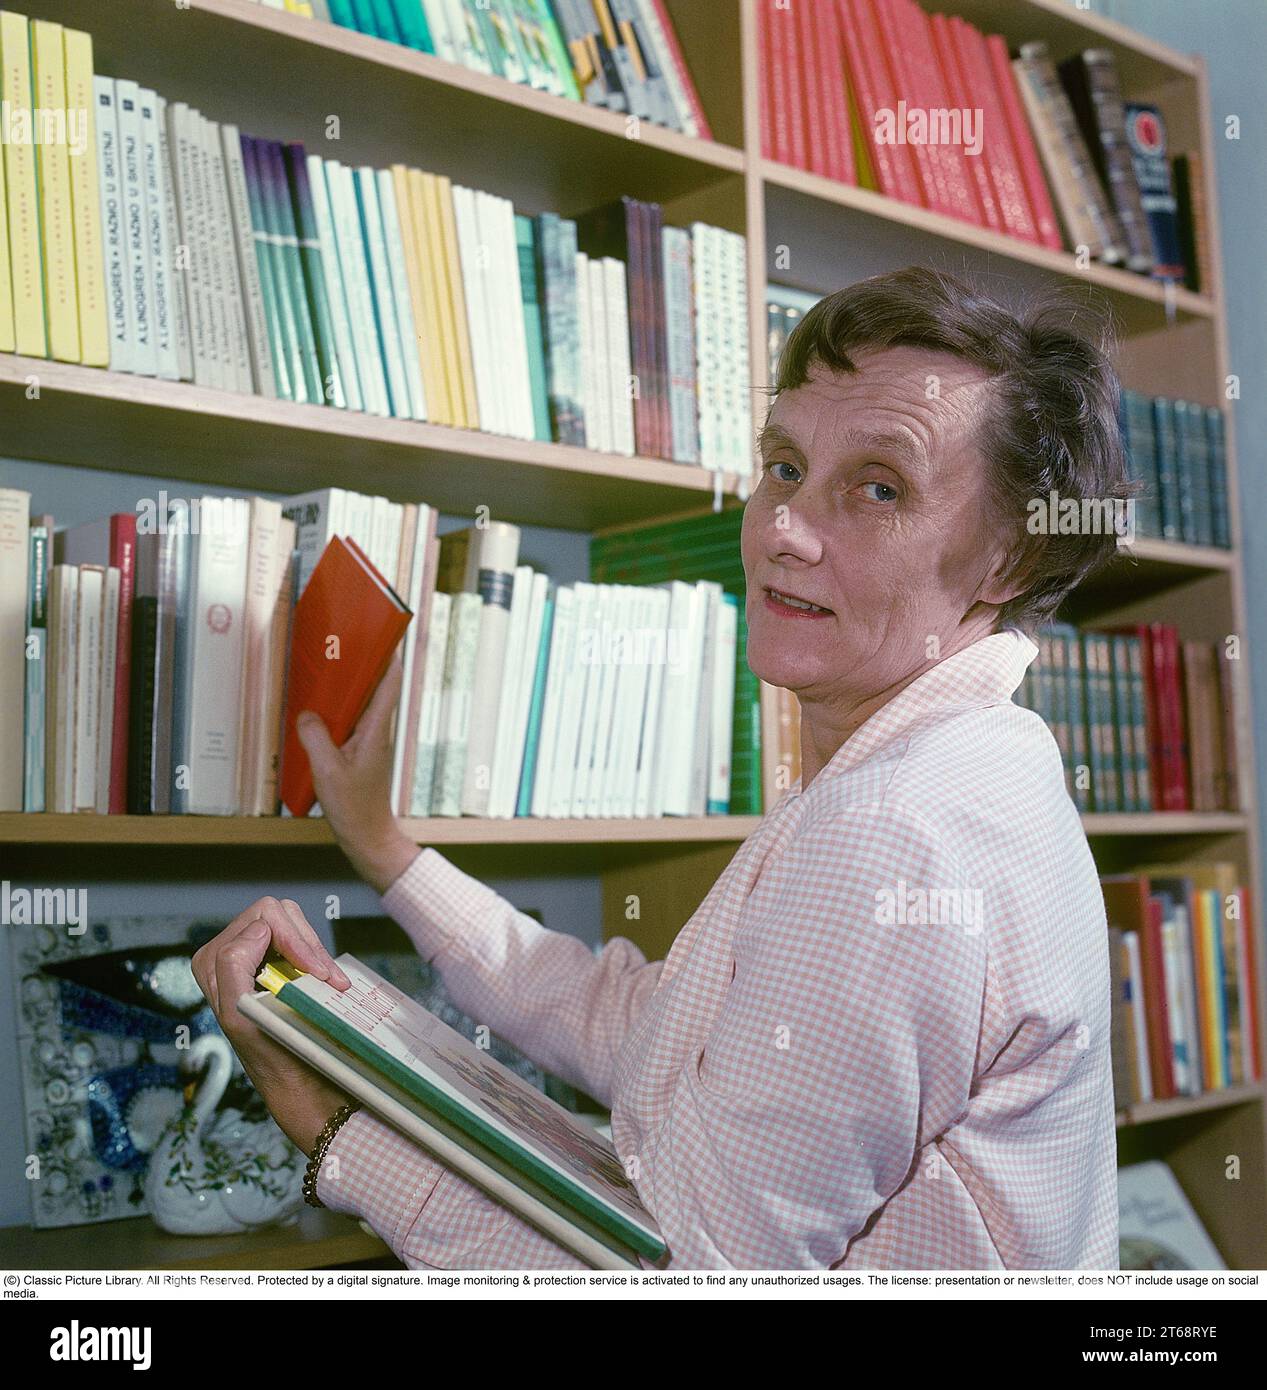 Astrid Lindgren. Swedish author of childrens books, songs and novels. Born 14 november 1907 - 28 january 2002. Internationally famous for the books featurings Pippi Longstocking, Emil of Lönneberga, Karlsson-on-the-roof and the Six Bullerby children. 2017 she was calculated to be the world's 18th most translated author. Roughly 167 million of her books was sold worldwide 2010. 1960 Stock Photo